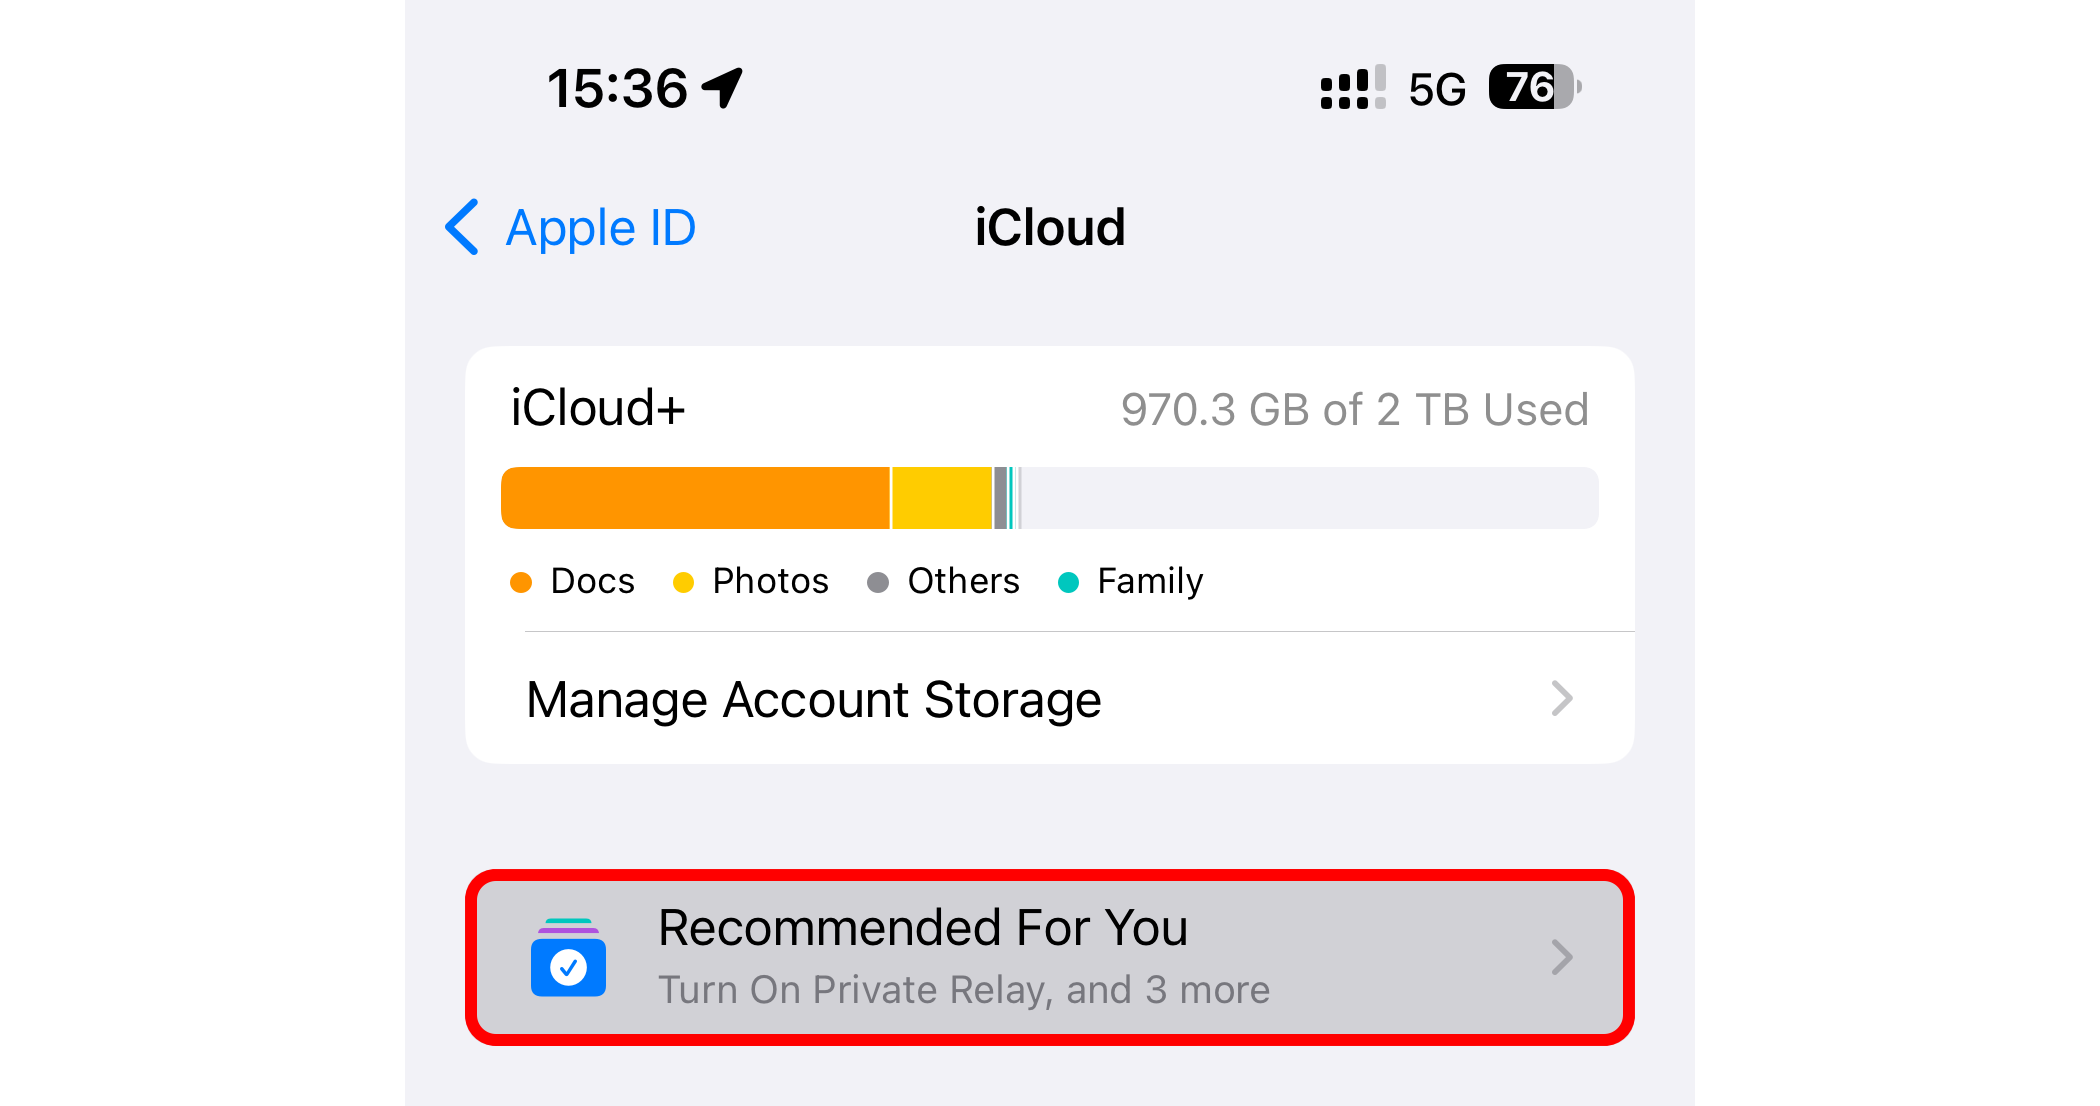 The iPhone's Settings app with the Recommended For You option highlighted in the iCloud section.